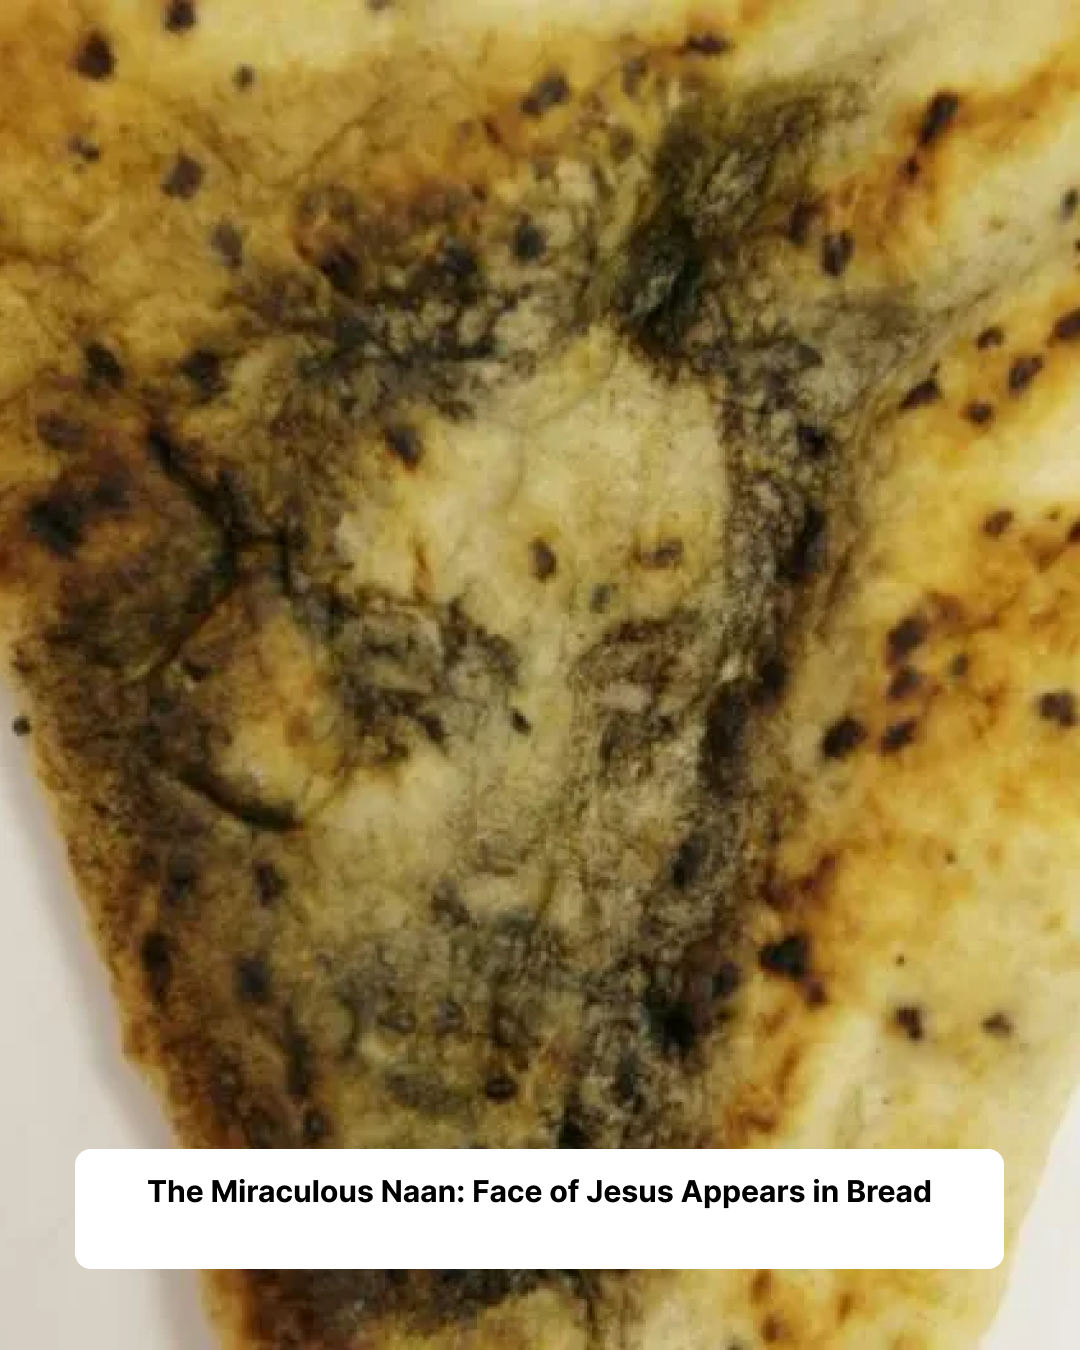 The Miraculous Naan: Face of Jesus Appears in Bread